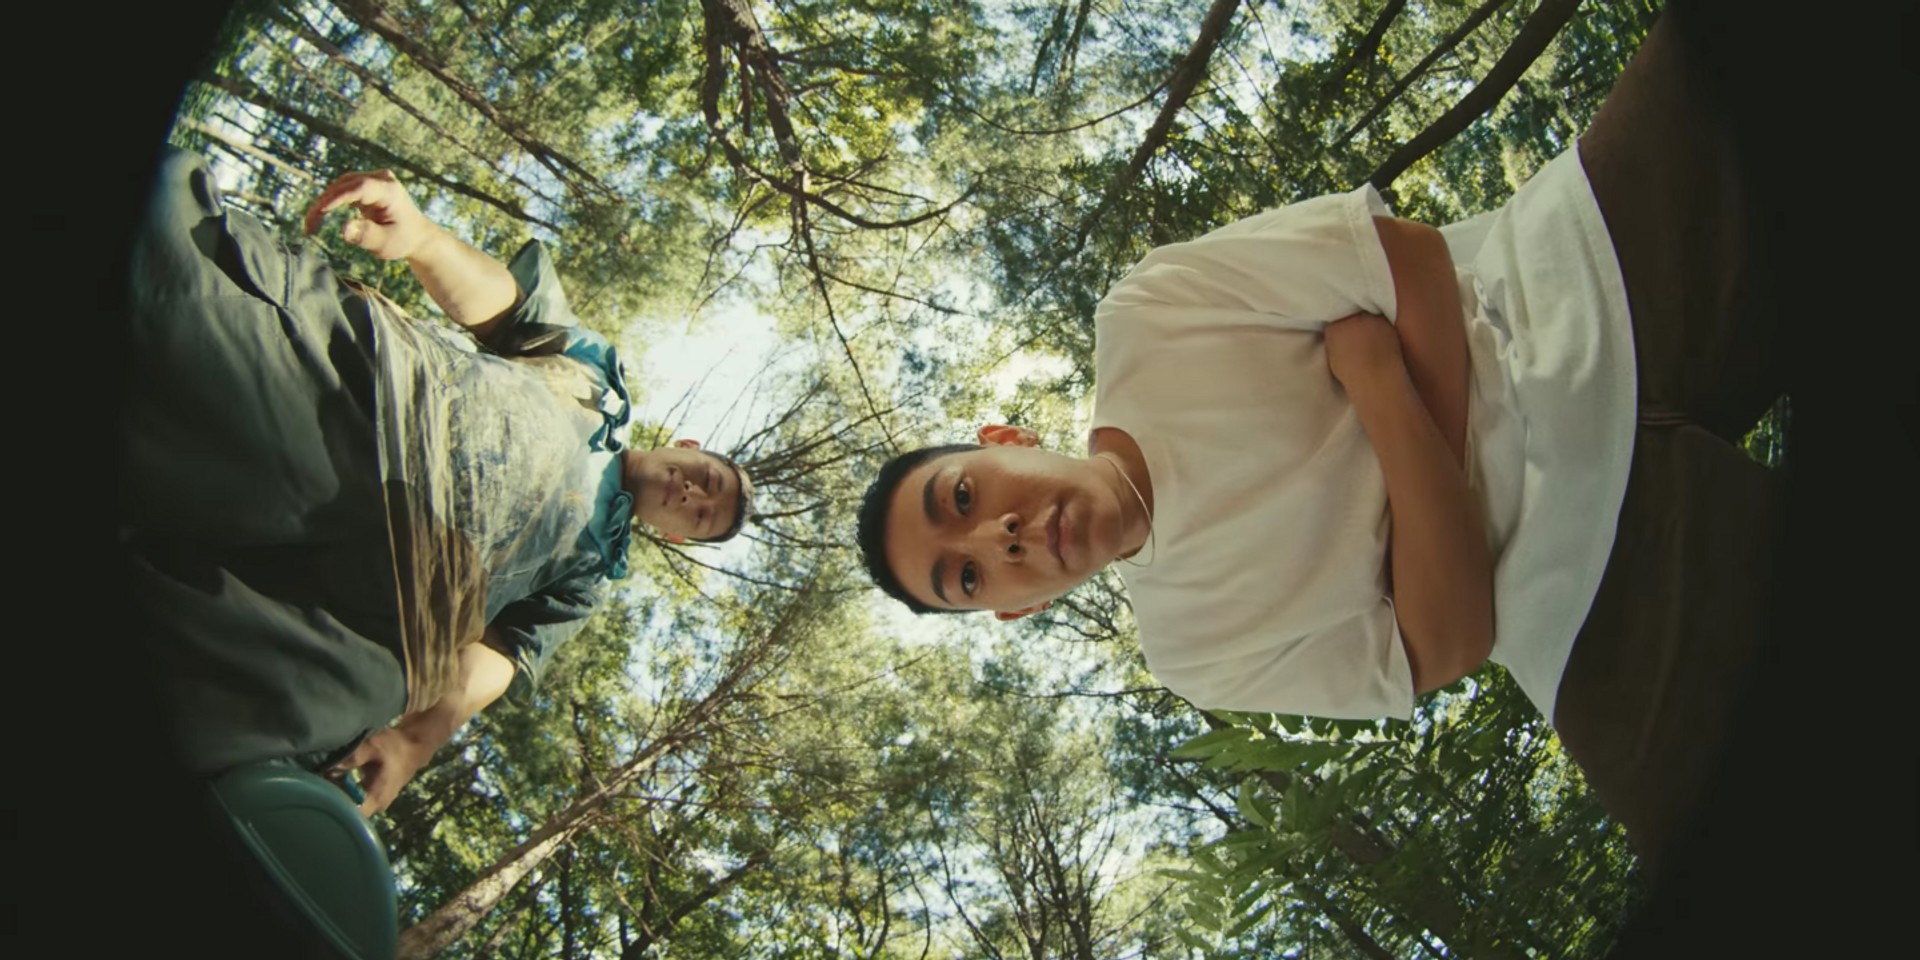 Loco teams up with george for new collaborative single 'Just Like This' – watch